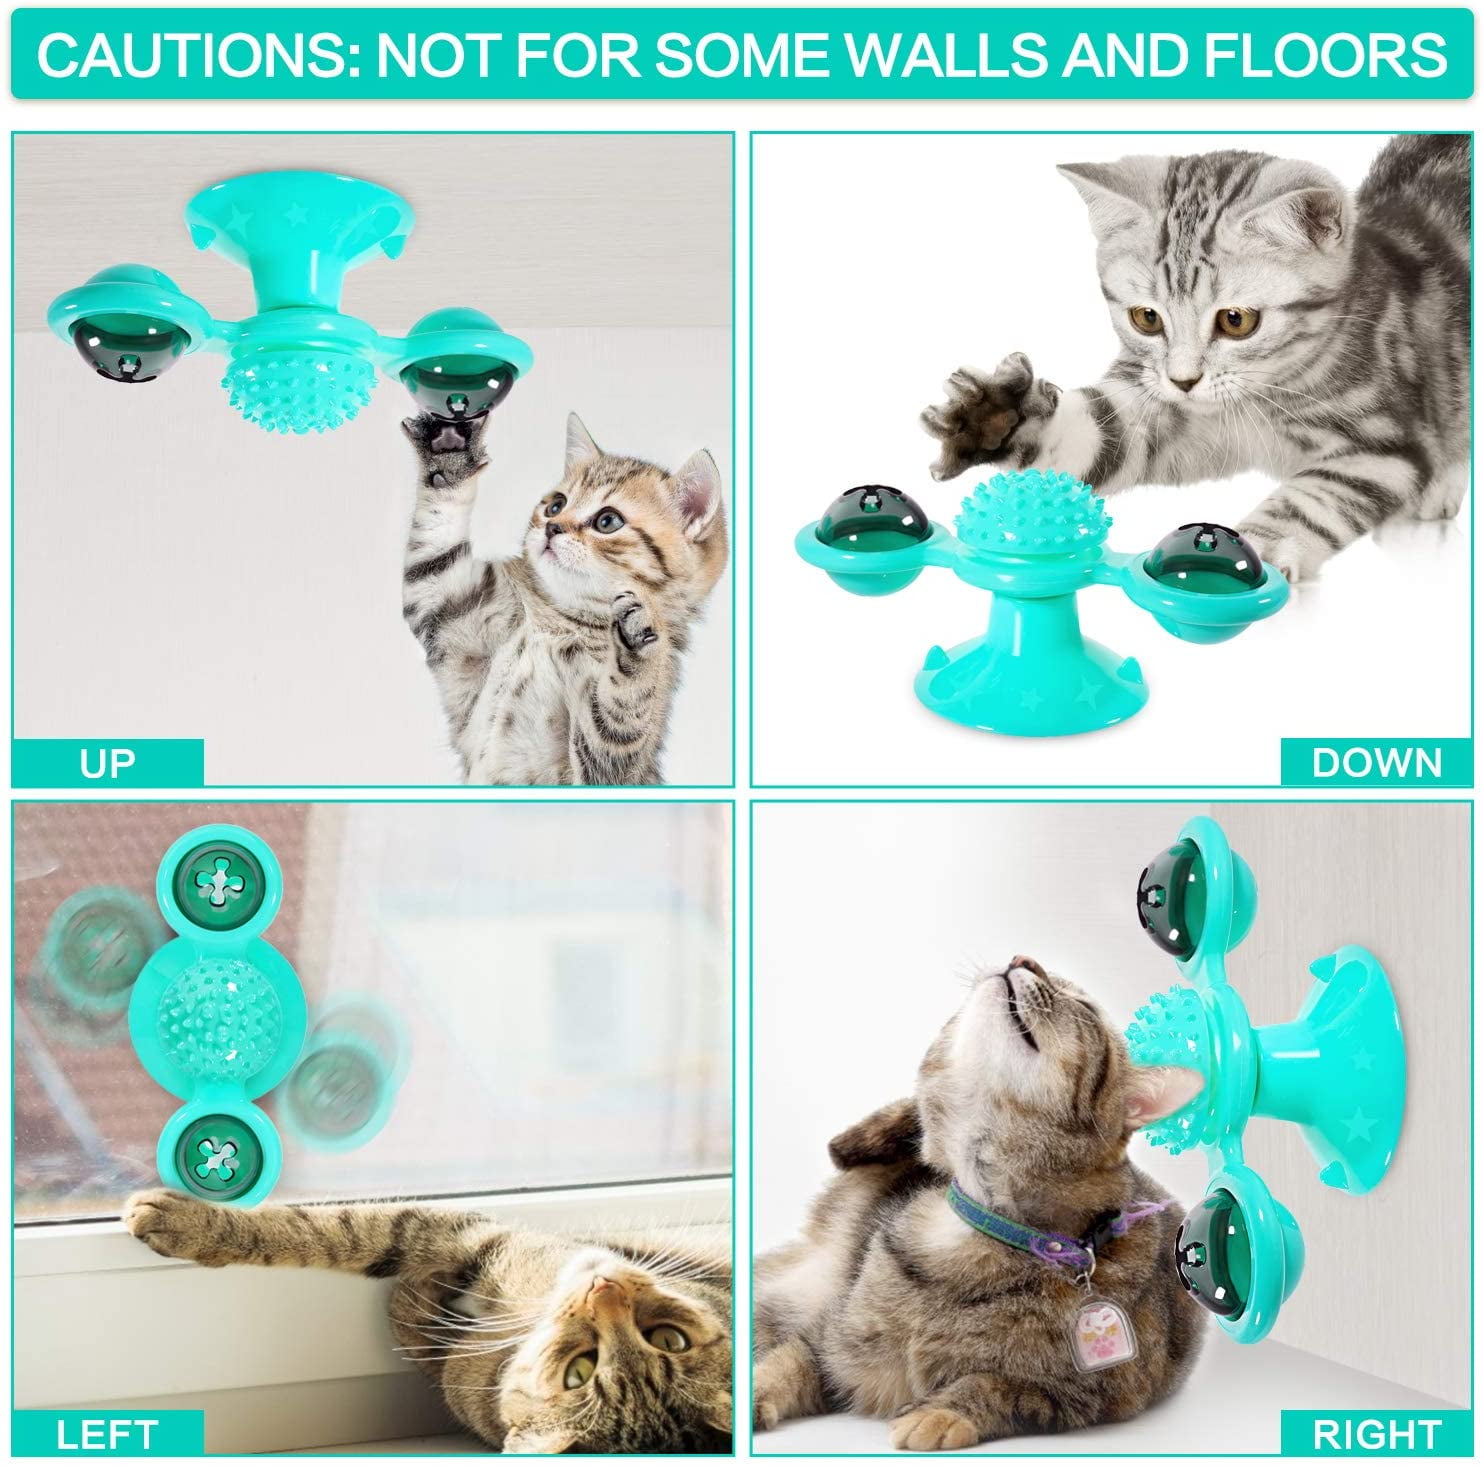 Green i-FSK Blue 2020 New Windmill Cat Toys Turntable Toys with Super Suction Cup to Wall and Grooming Rubber Molar with Light Balls with Catnips Interactive Cat Toy 